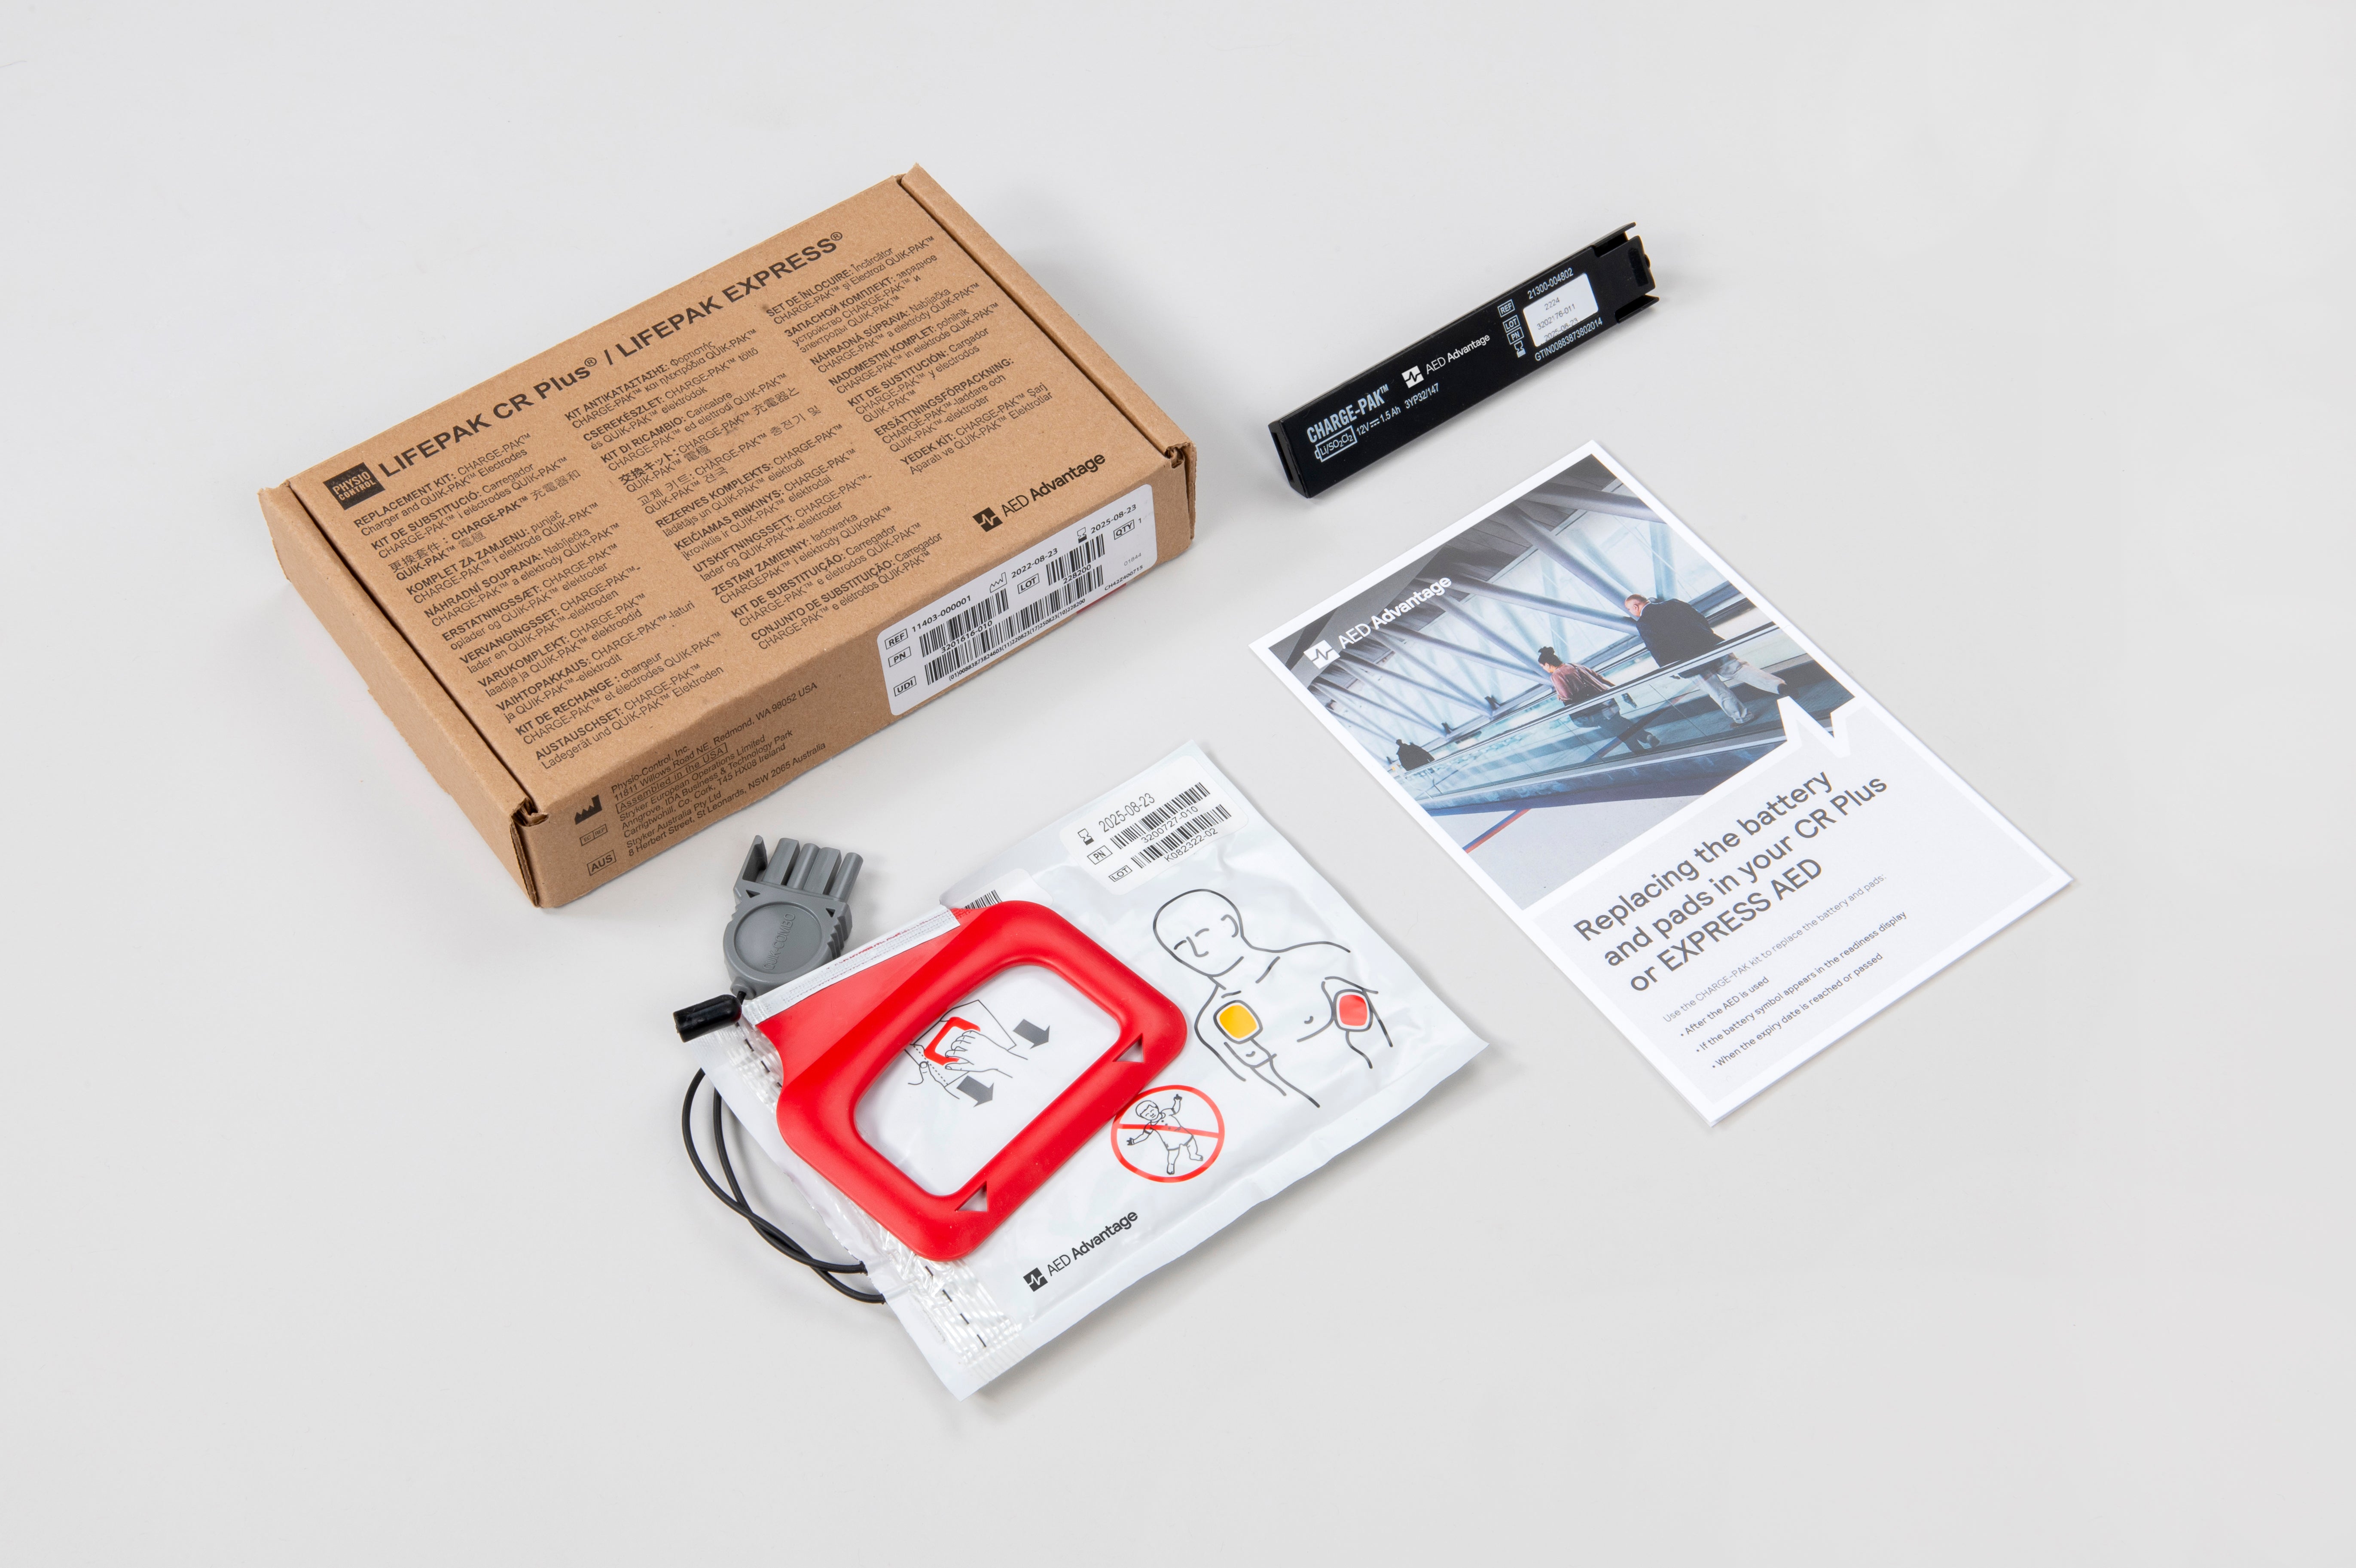 A set of electrodes, and a battery pack, and instructions for a CR Plus defibrillator